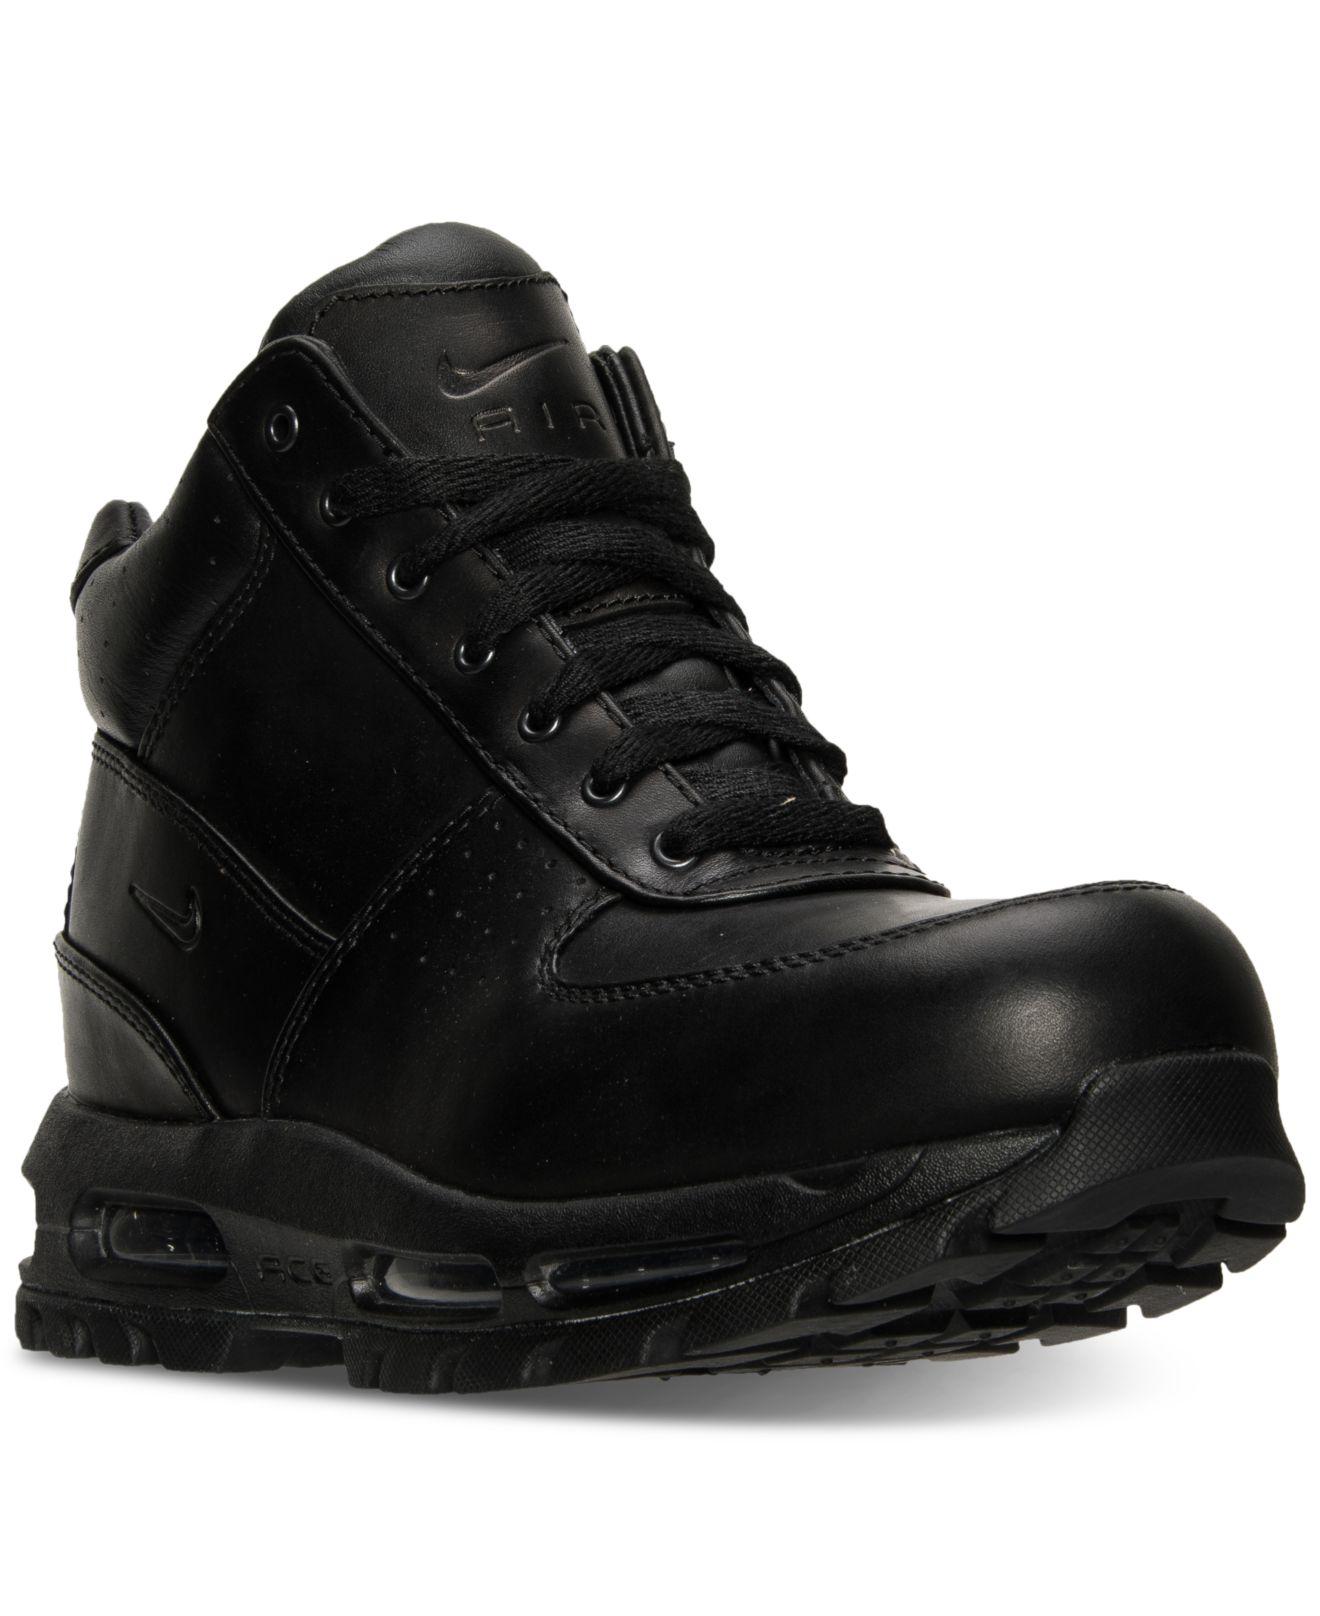 Nike Leather Air Max Goadome Boots in Black/Black/Black (Black) for Men -  Save 40% - Lyst